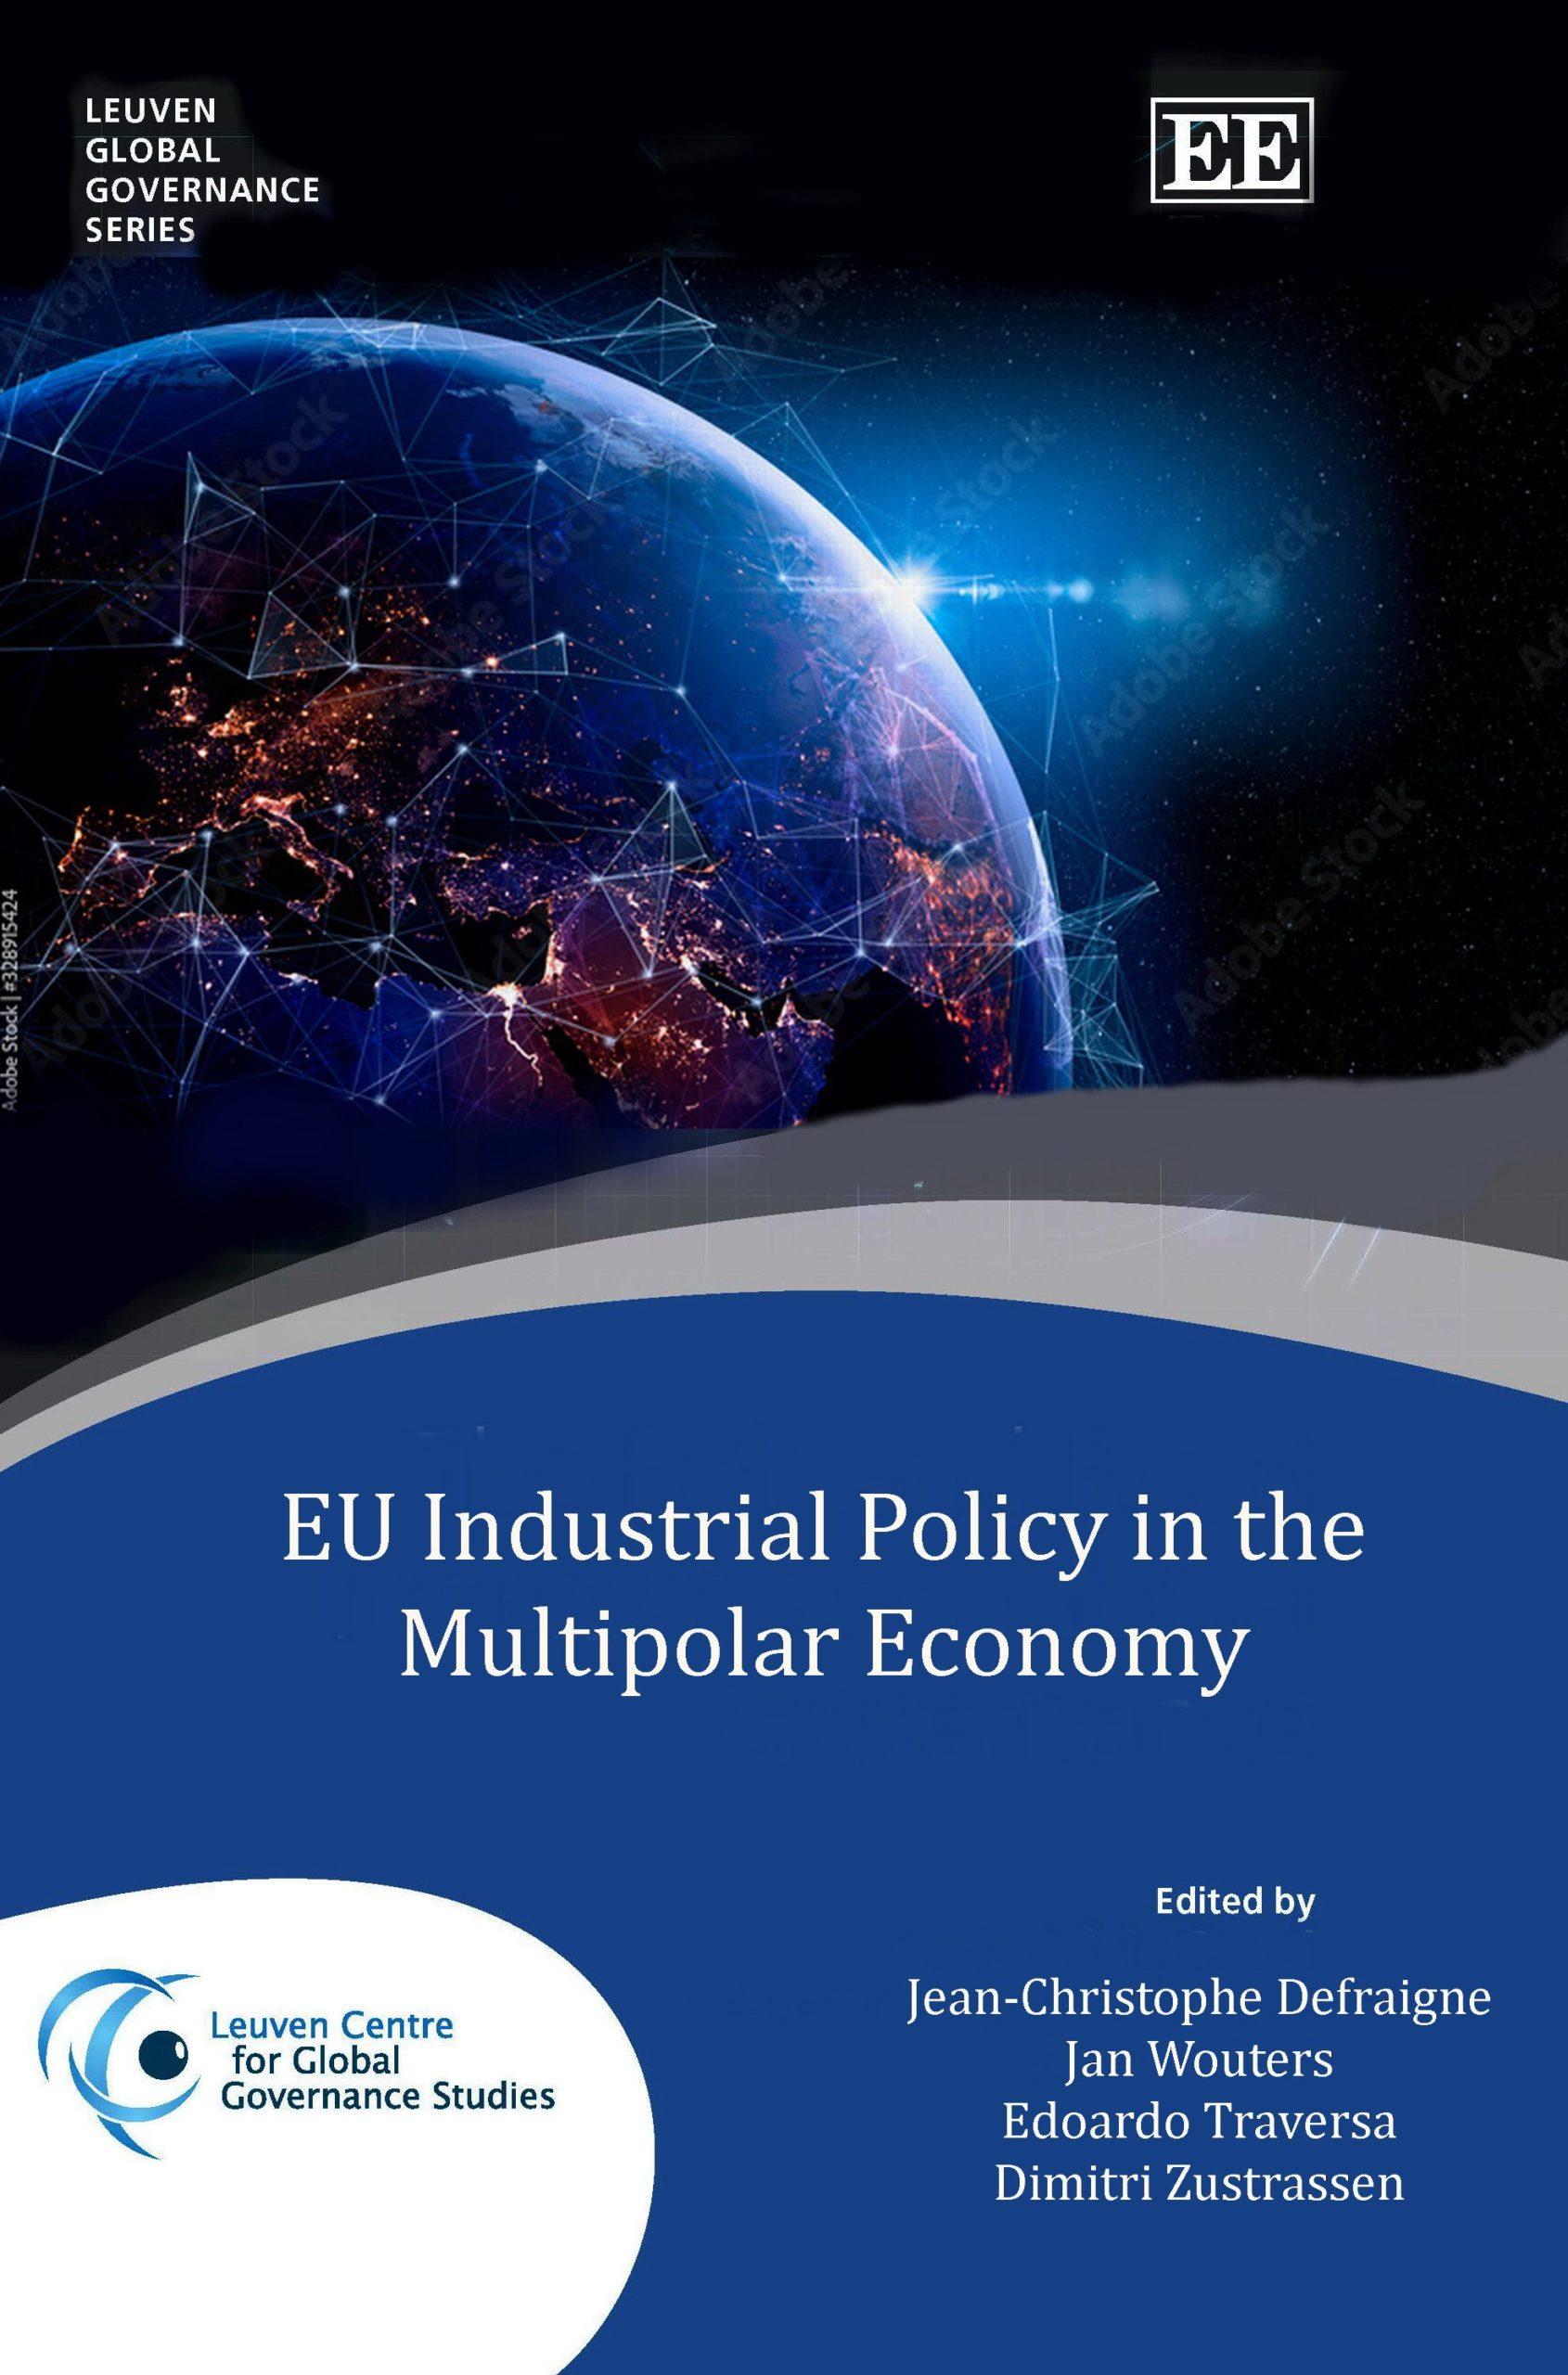 Past Event – Book Launch “EU Industrial Policy in the Multipolar Economy: How to Ensure Europe’s Strategic Autonomy vis-à-vis China and the US?” on 15.11.2022